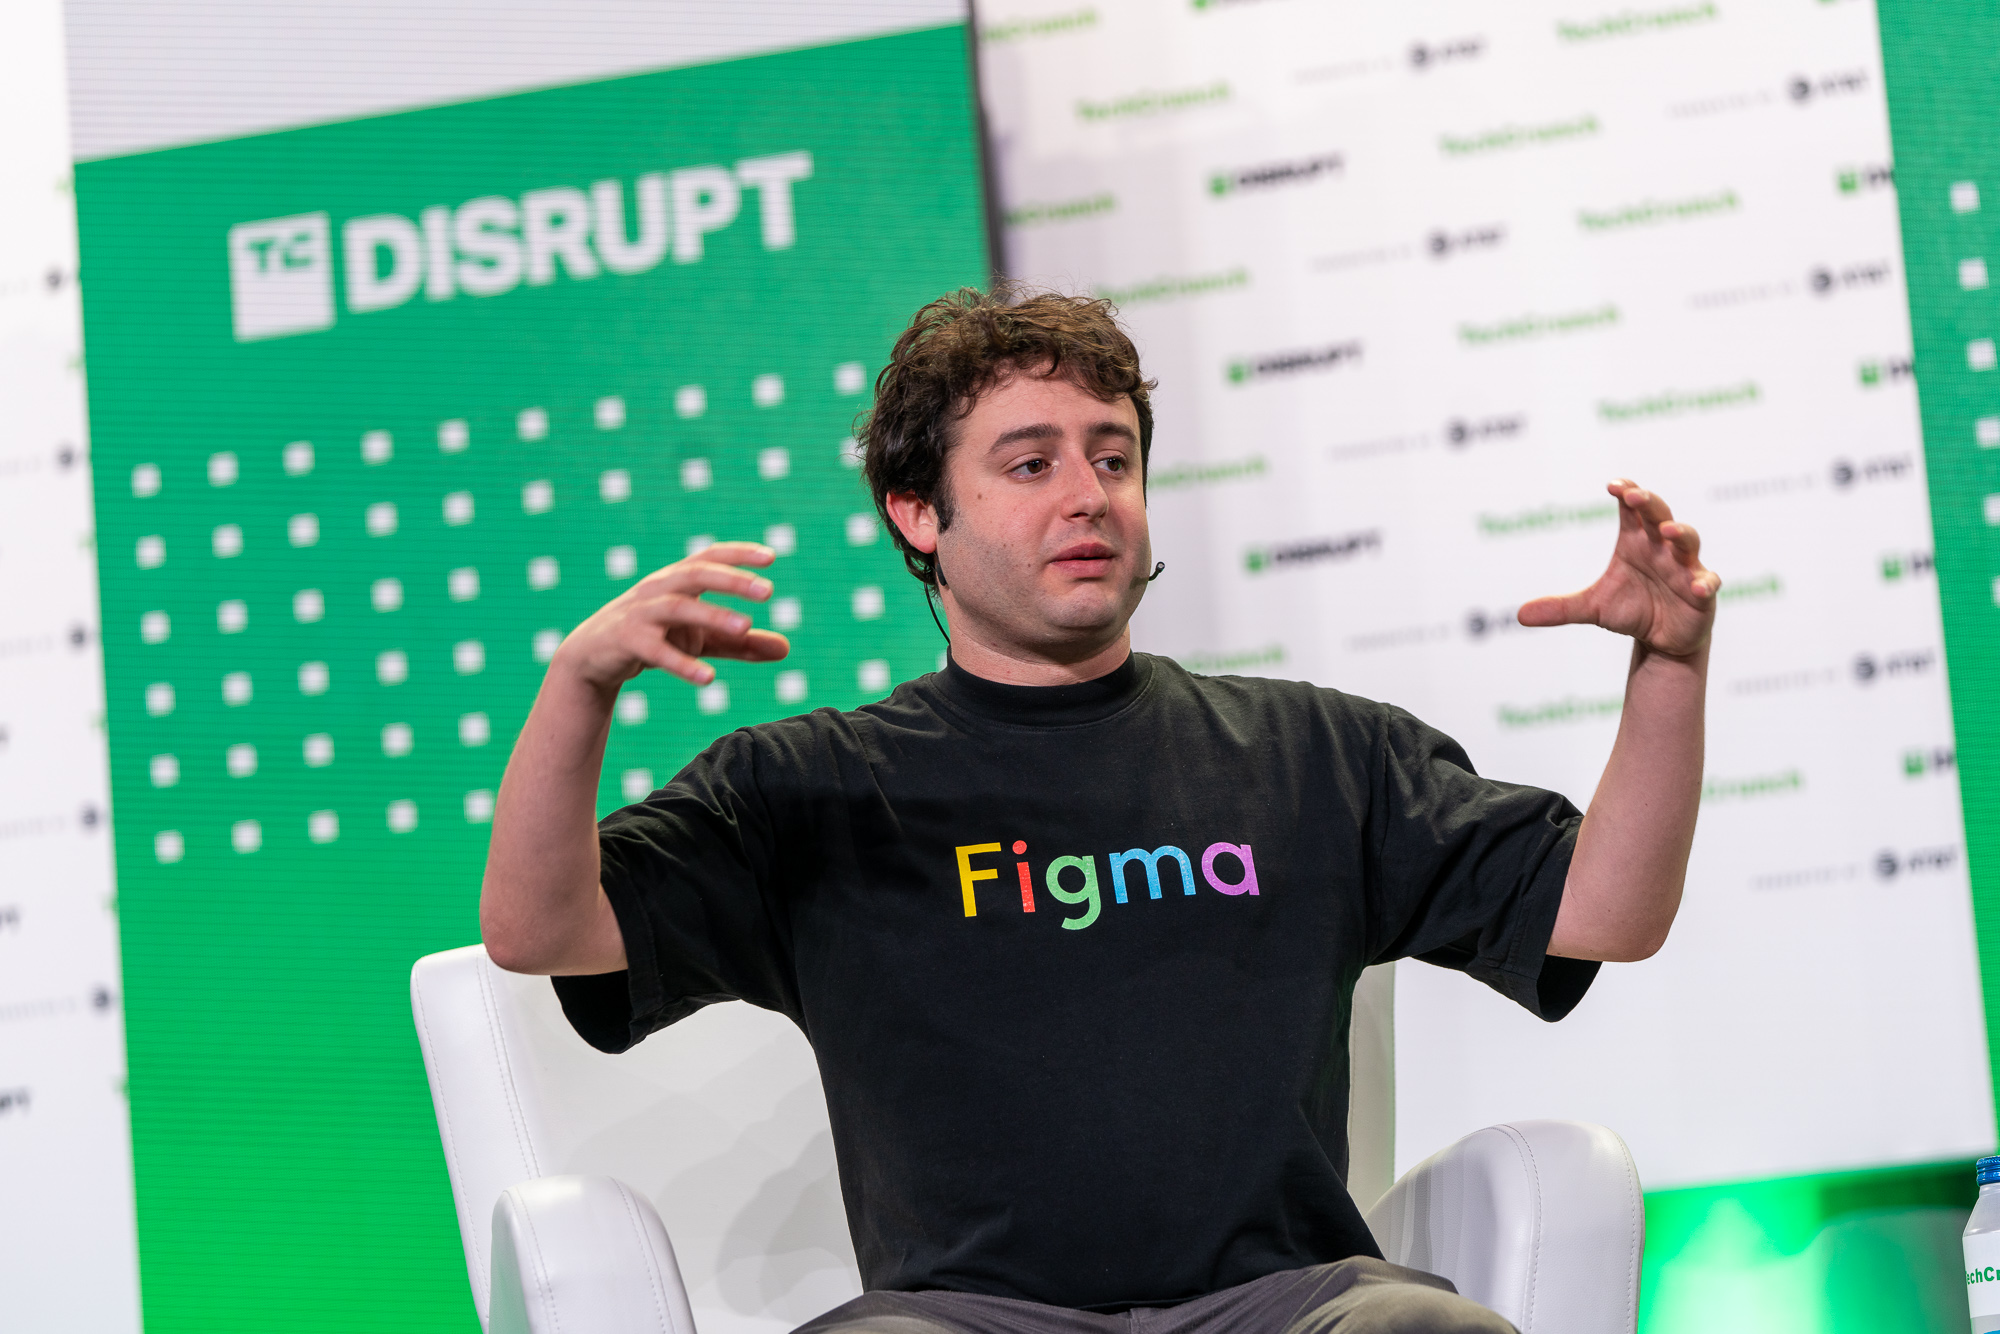 Dylan Field, CEO at Figma on the TechCrunch Disrupt stage in San Francisco on October 20, 2022. Image Credit: Haje Kamps / TechCrunch